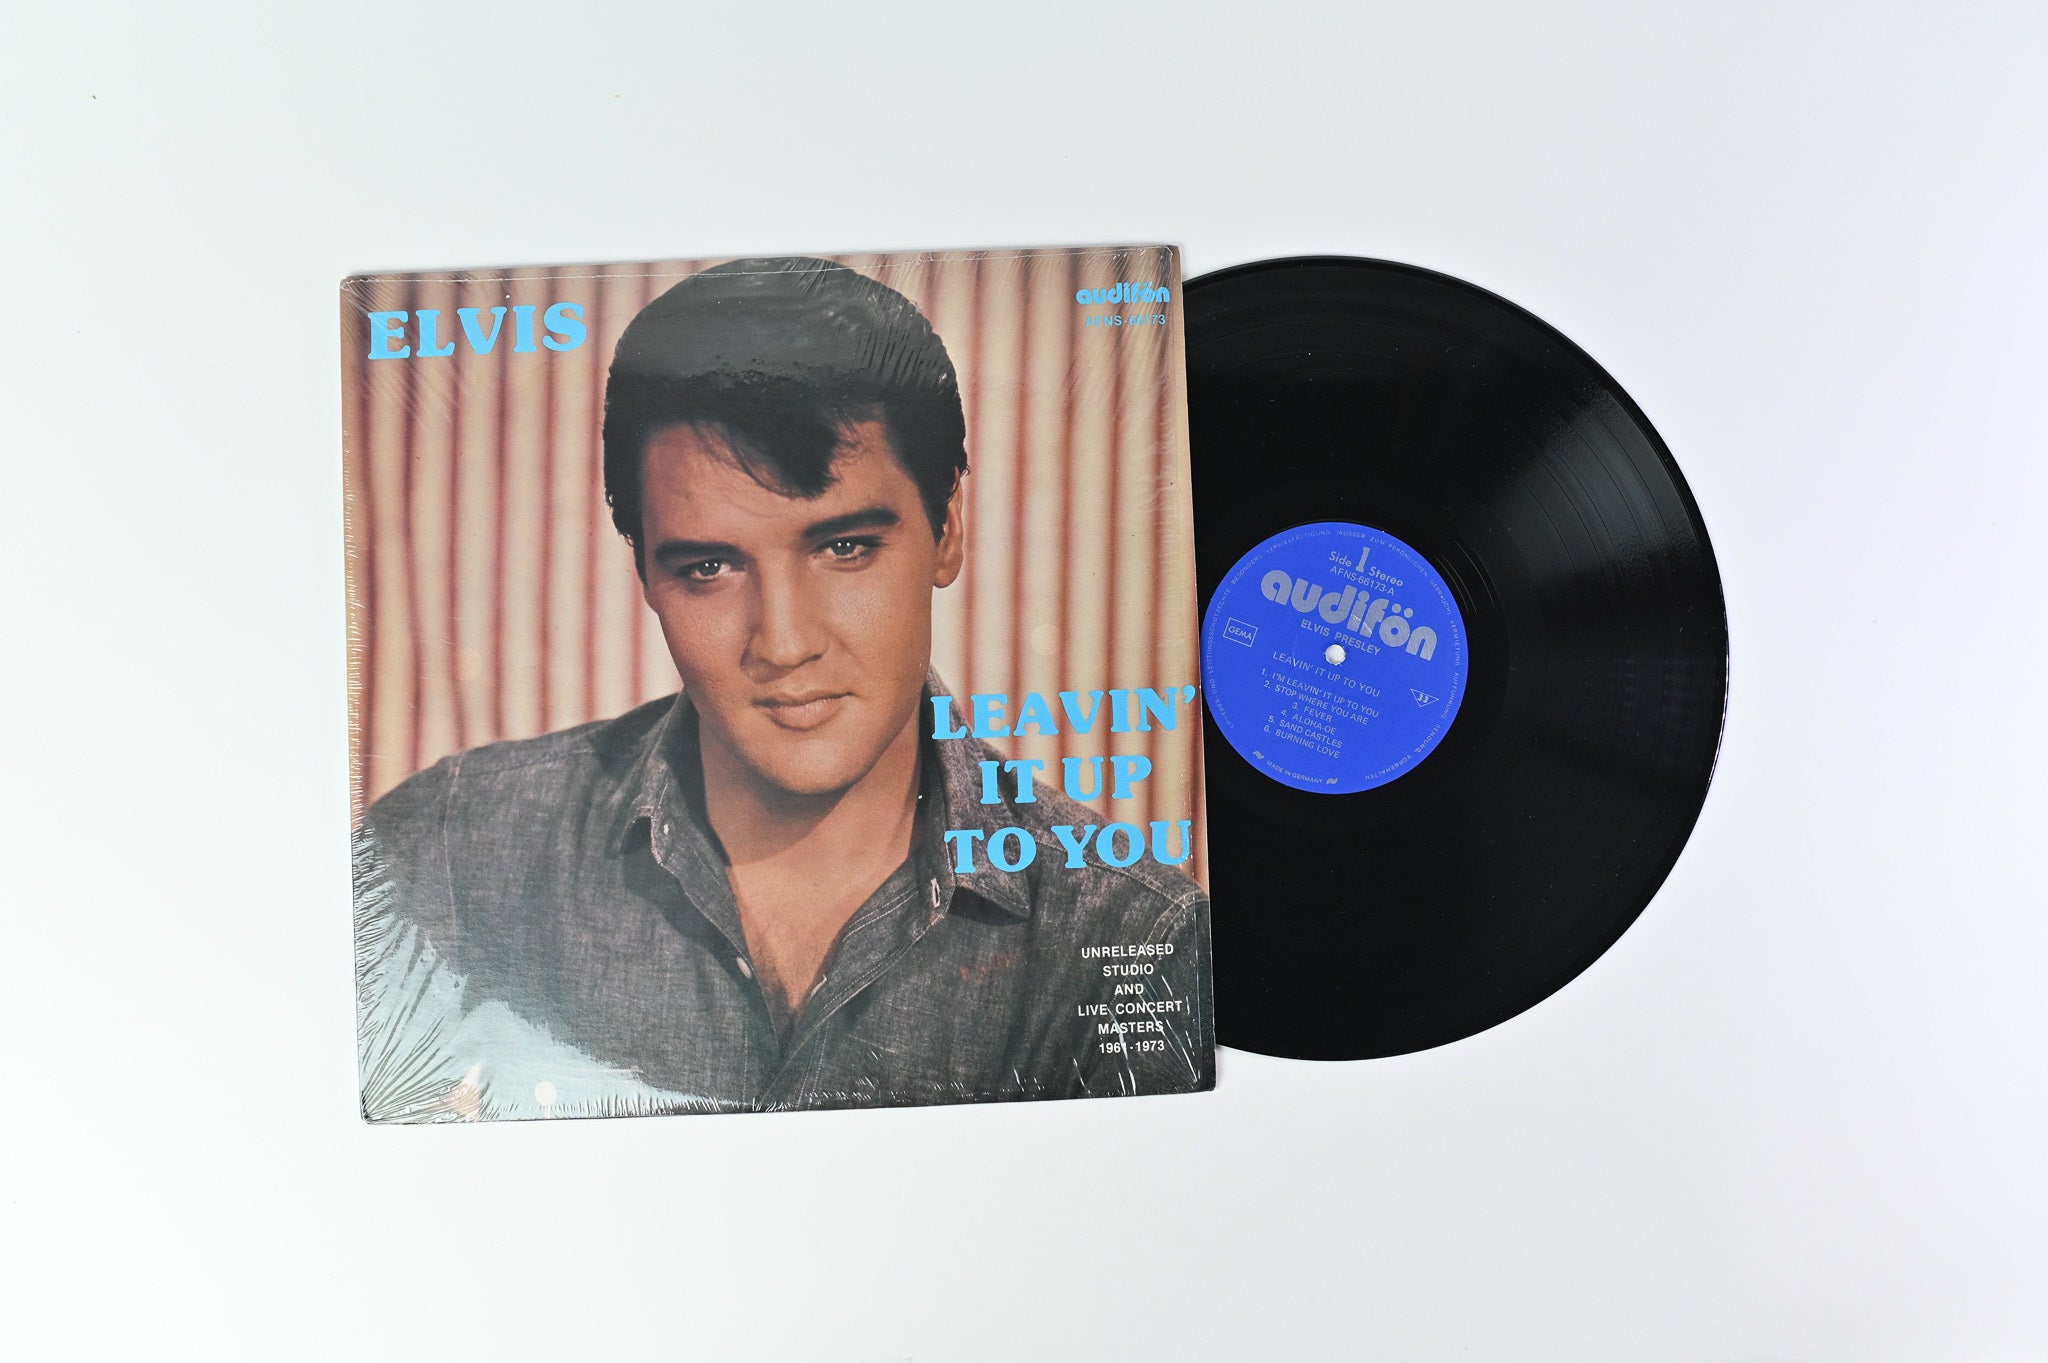 Elvis Presley - Leavin' It Up To You on Audifon (Unreleased Studio And Live Concert Masters 1961-1973) Unofficial